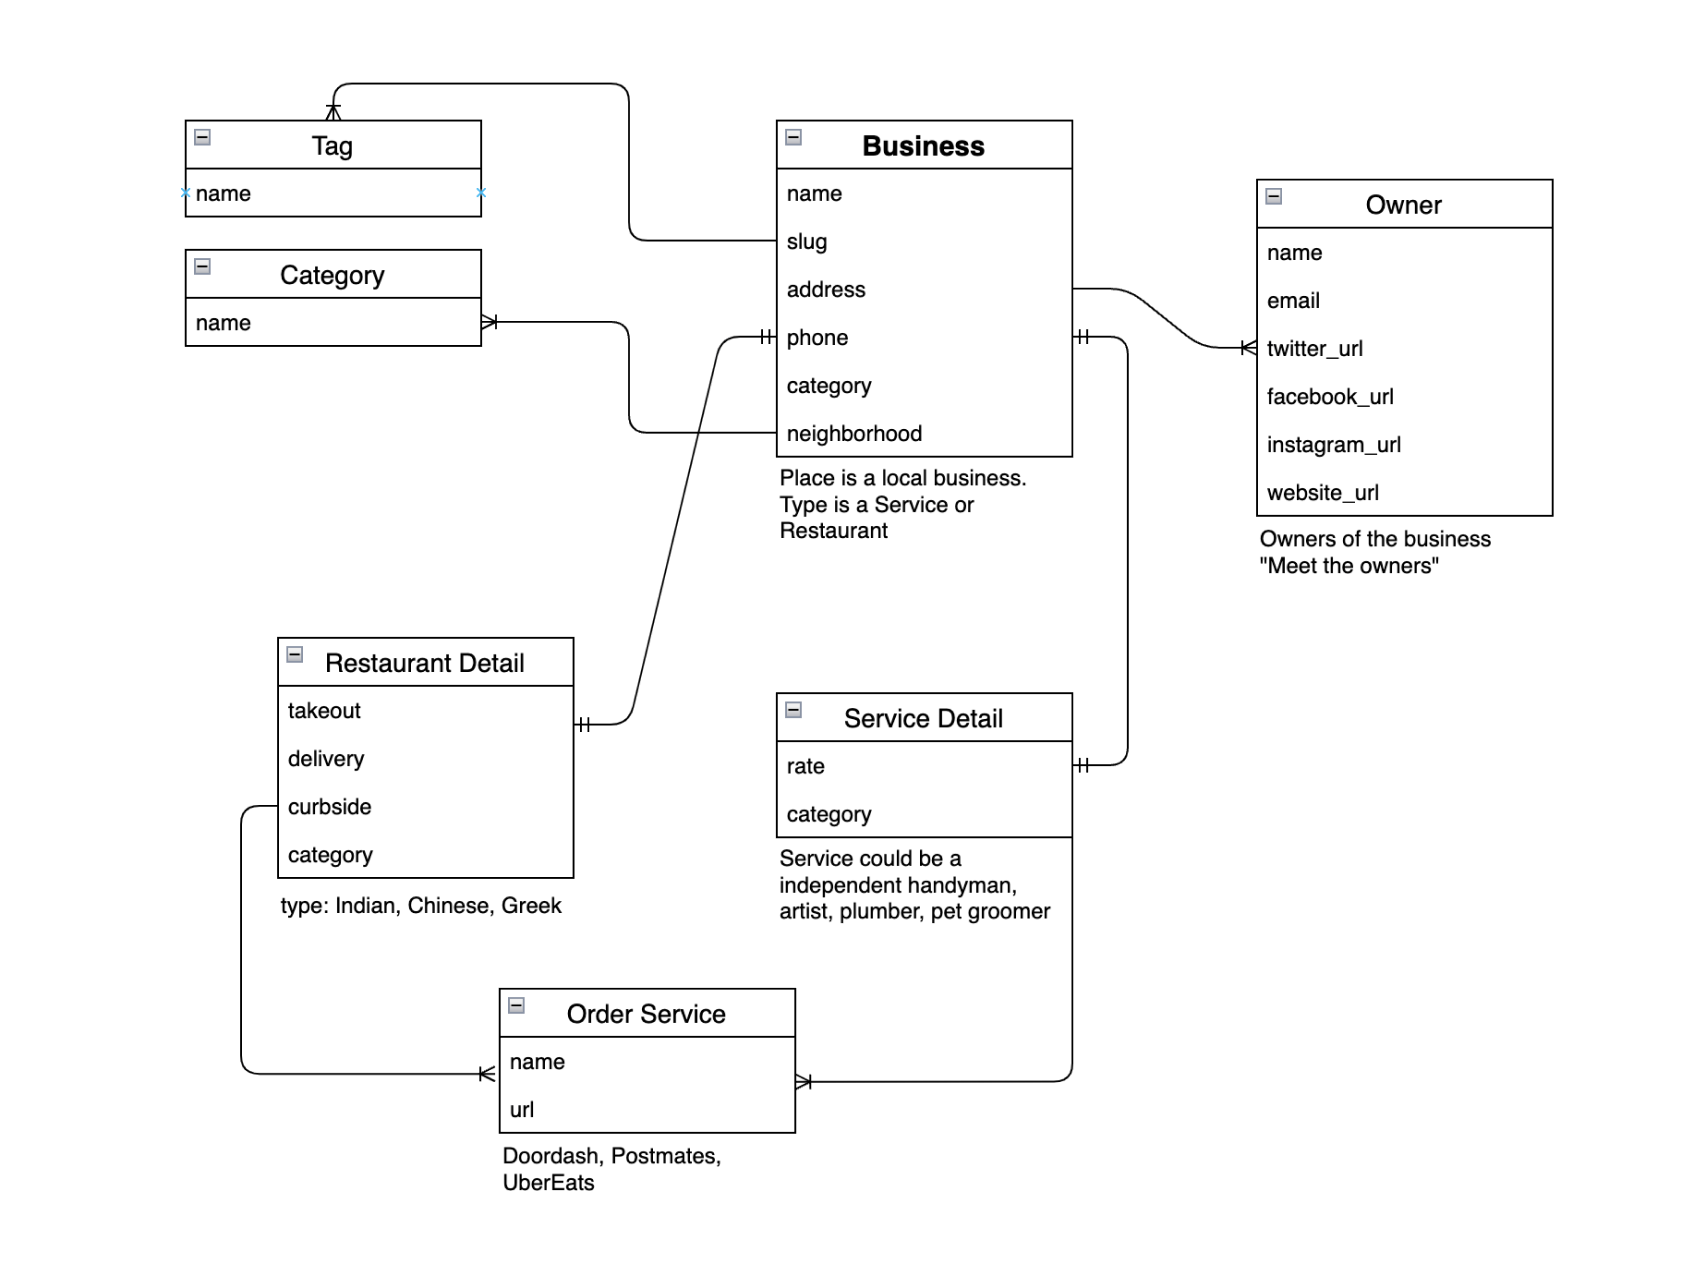 Diagram of the database